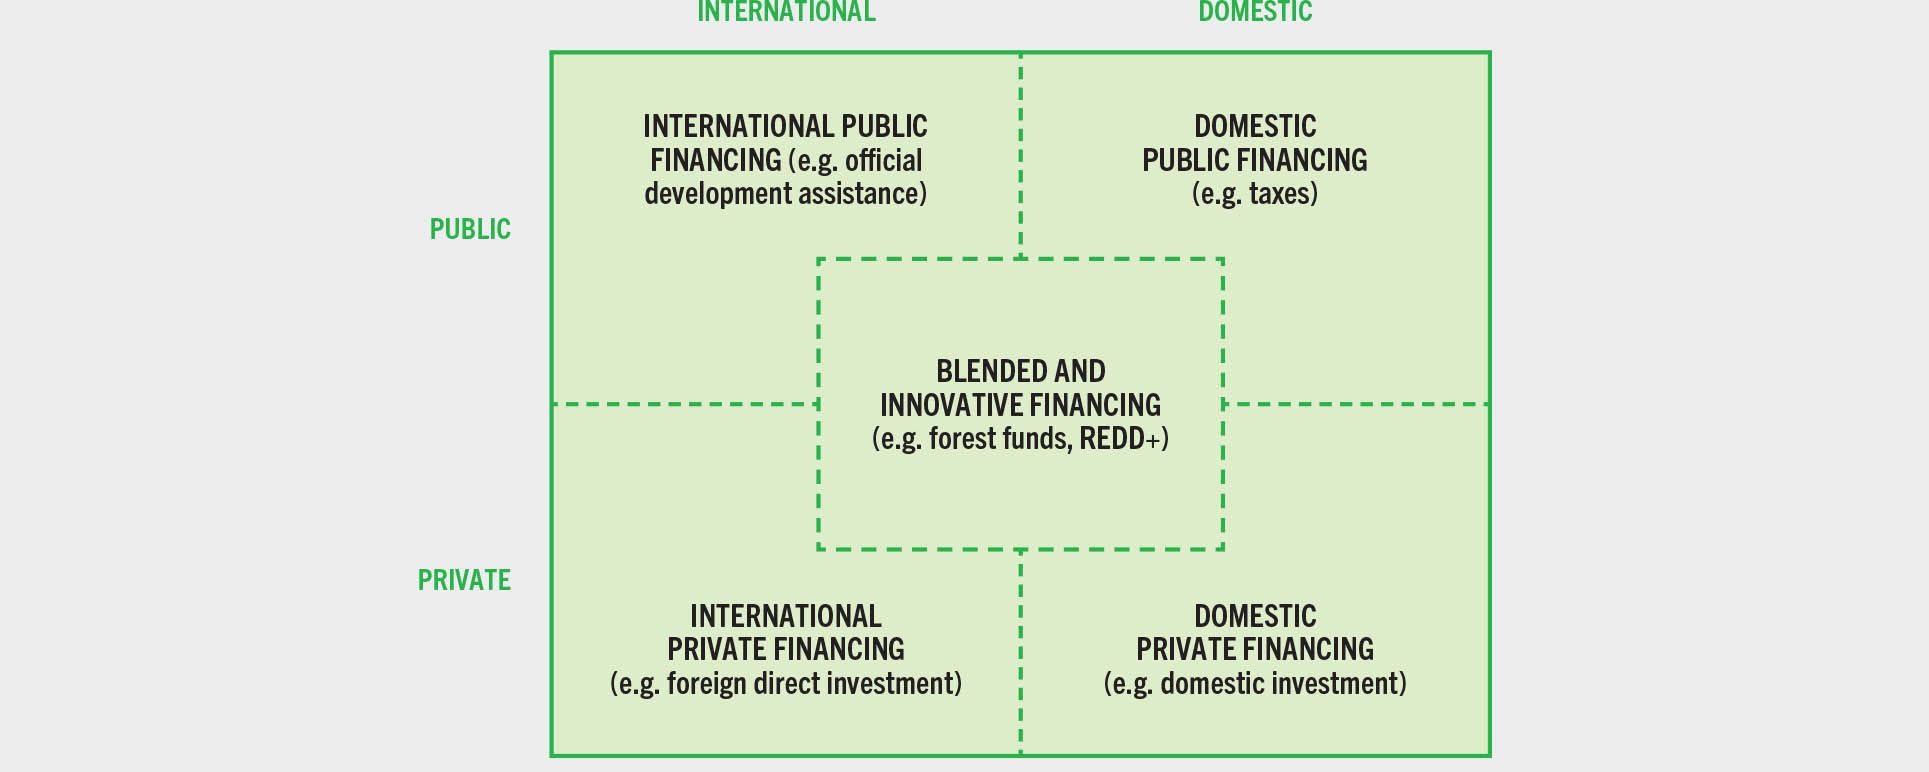 SOURCE: Singer, B. 2016. Financing sustainable forest management in developing countries: the case for a holistic approach. International Forestry Review, 18(1): 96–109. https://doi.org/10.1505/146554816818206159